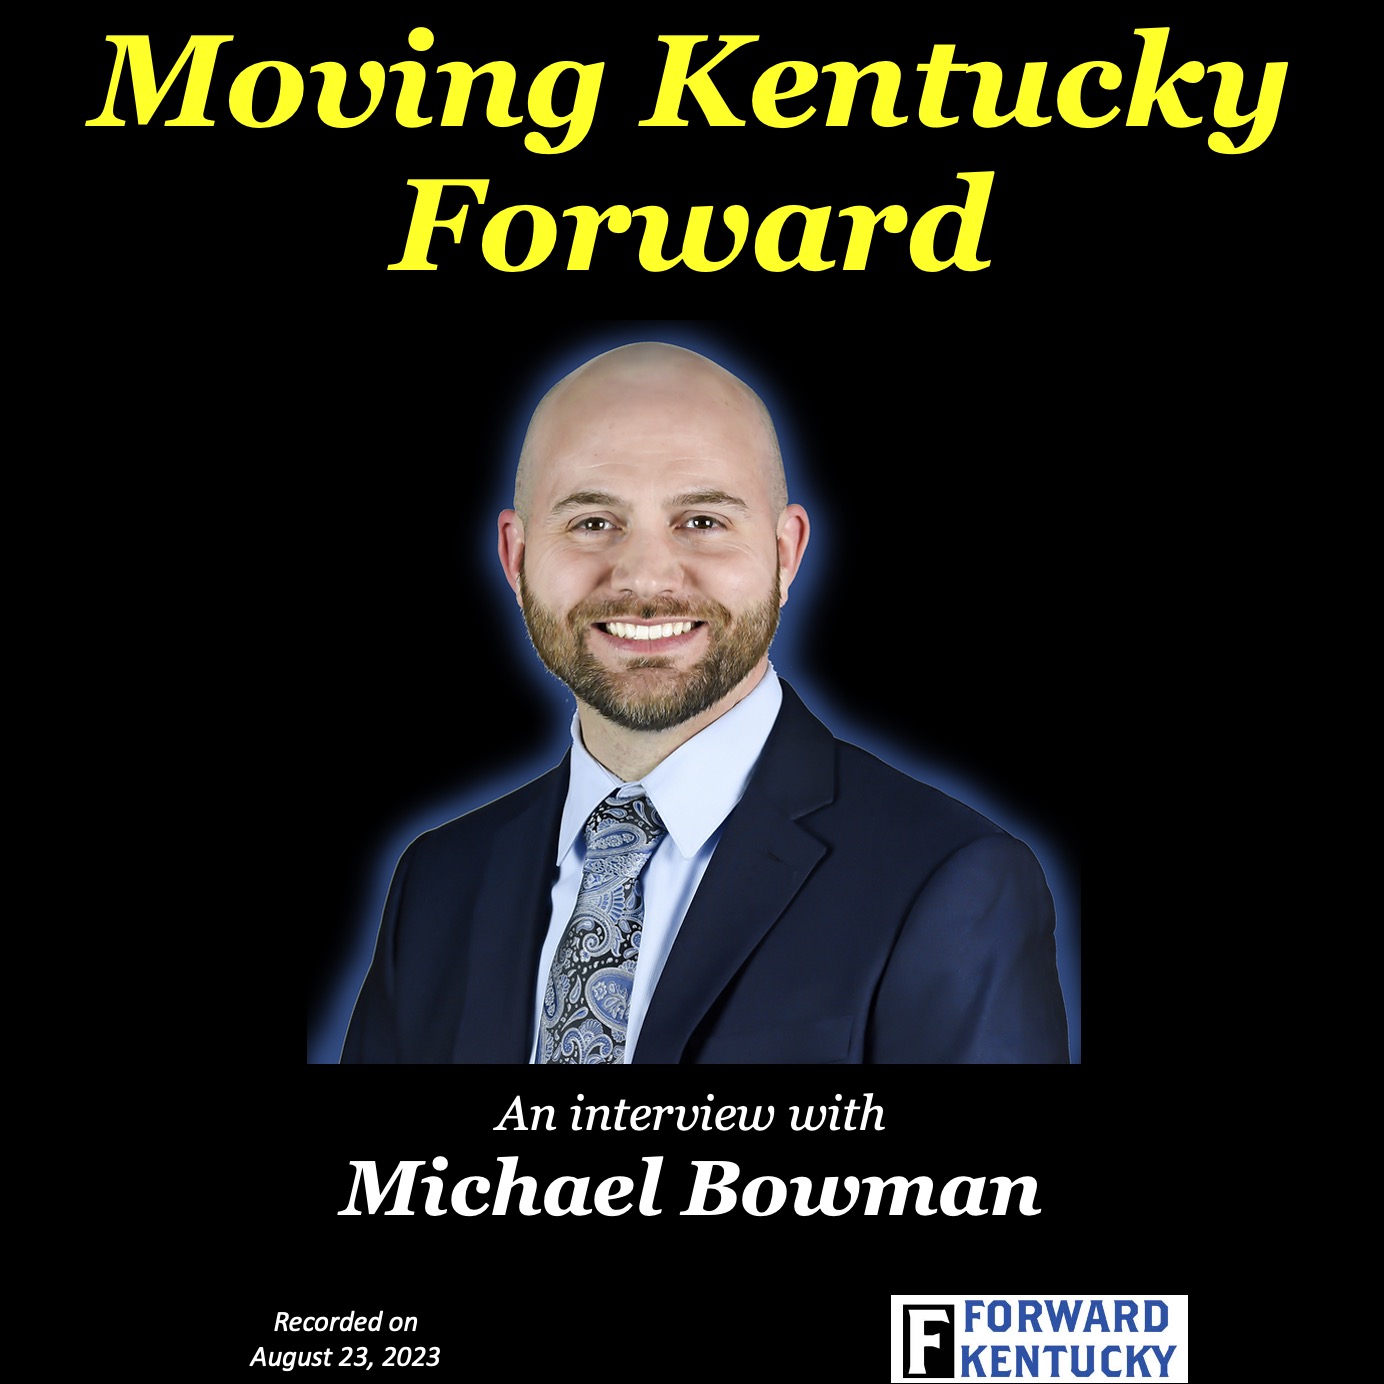 An interview with Michael Bowman, candidate for Treasurer